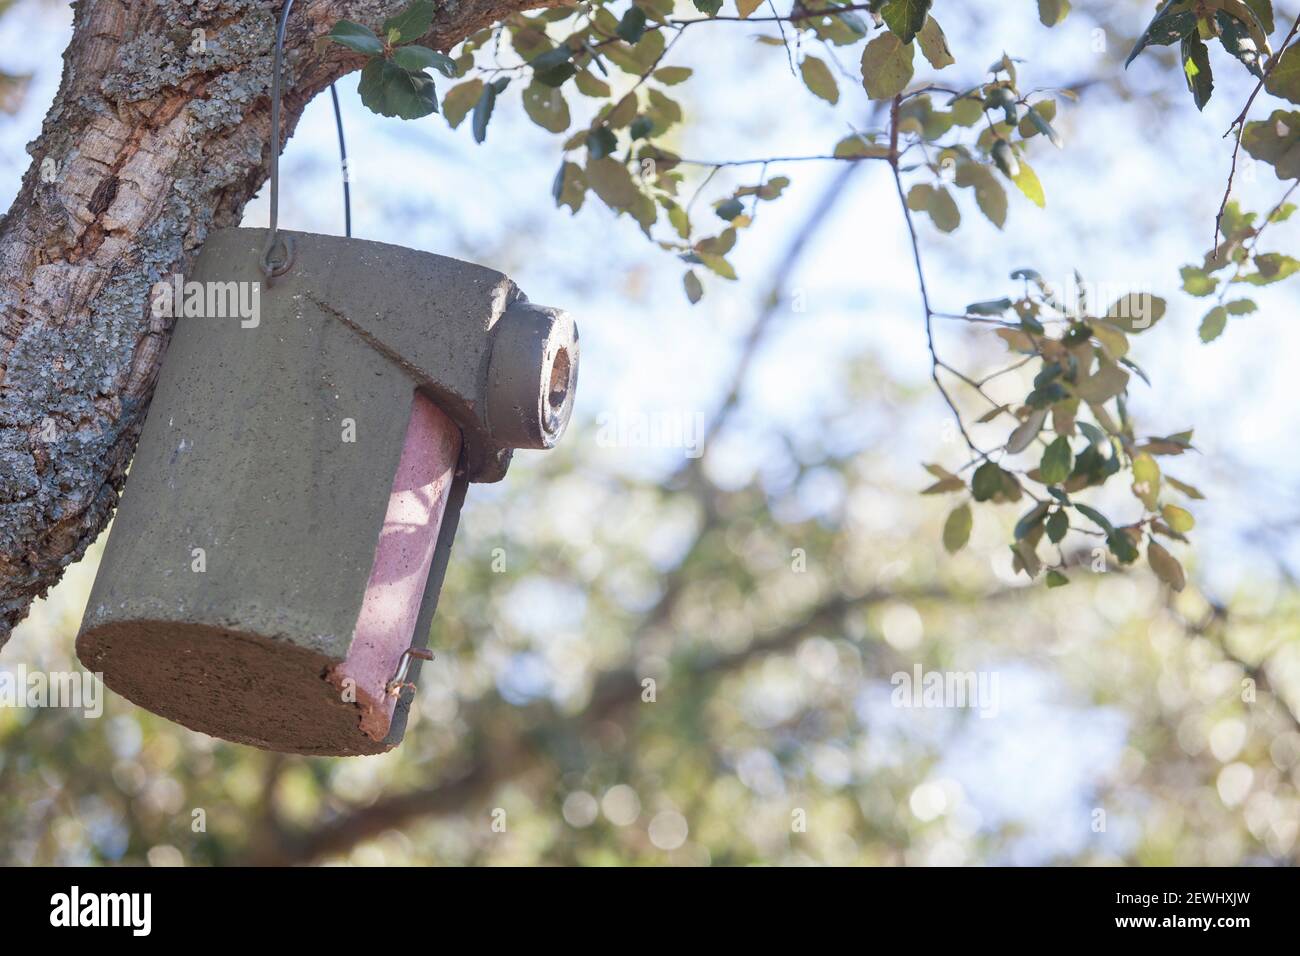 Trail camera polyurethane box. Placed hanging from tree branch. Stock Photo